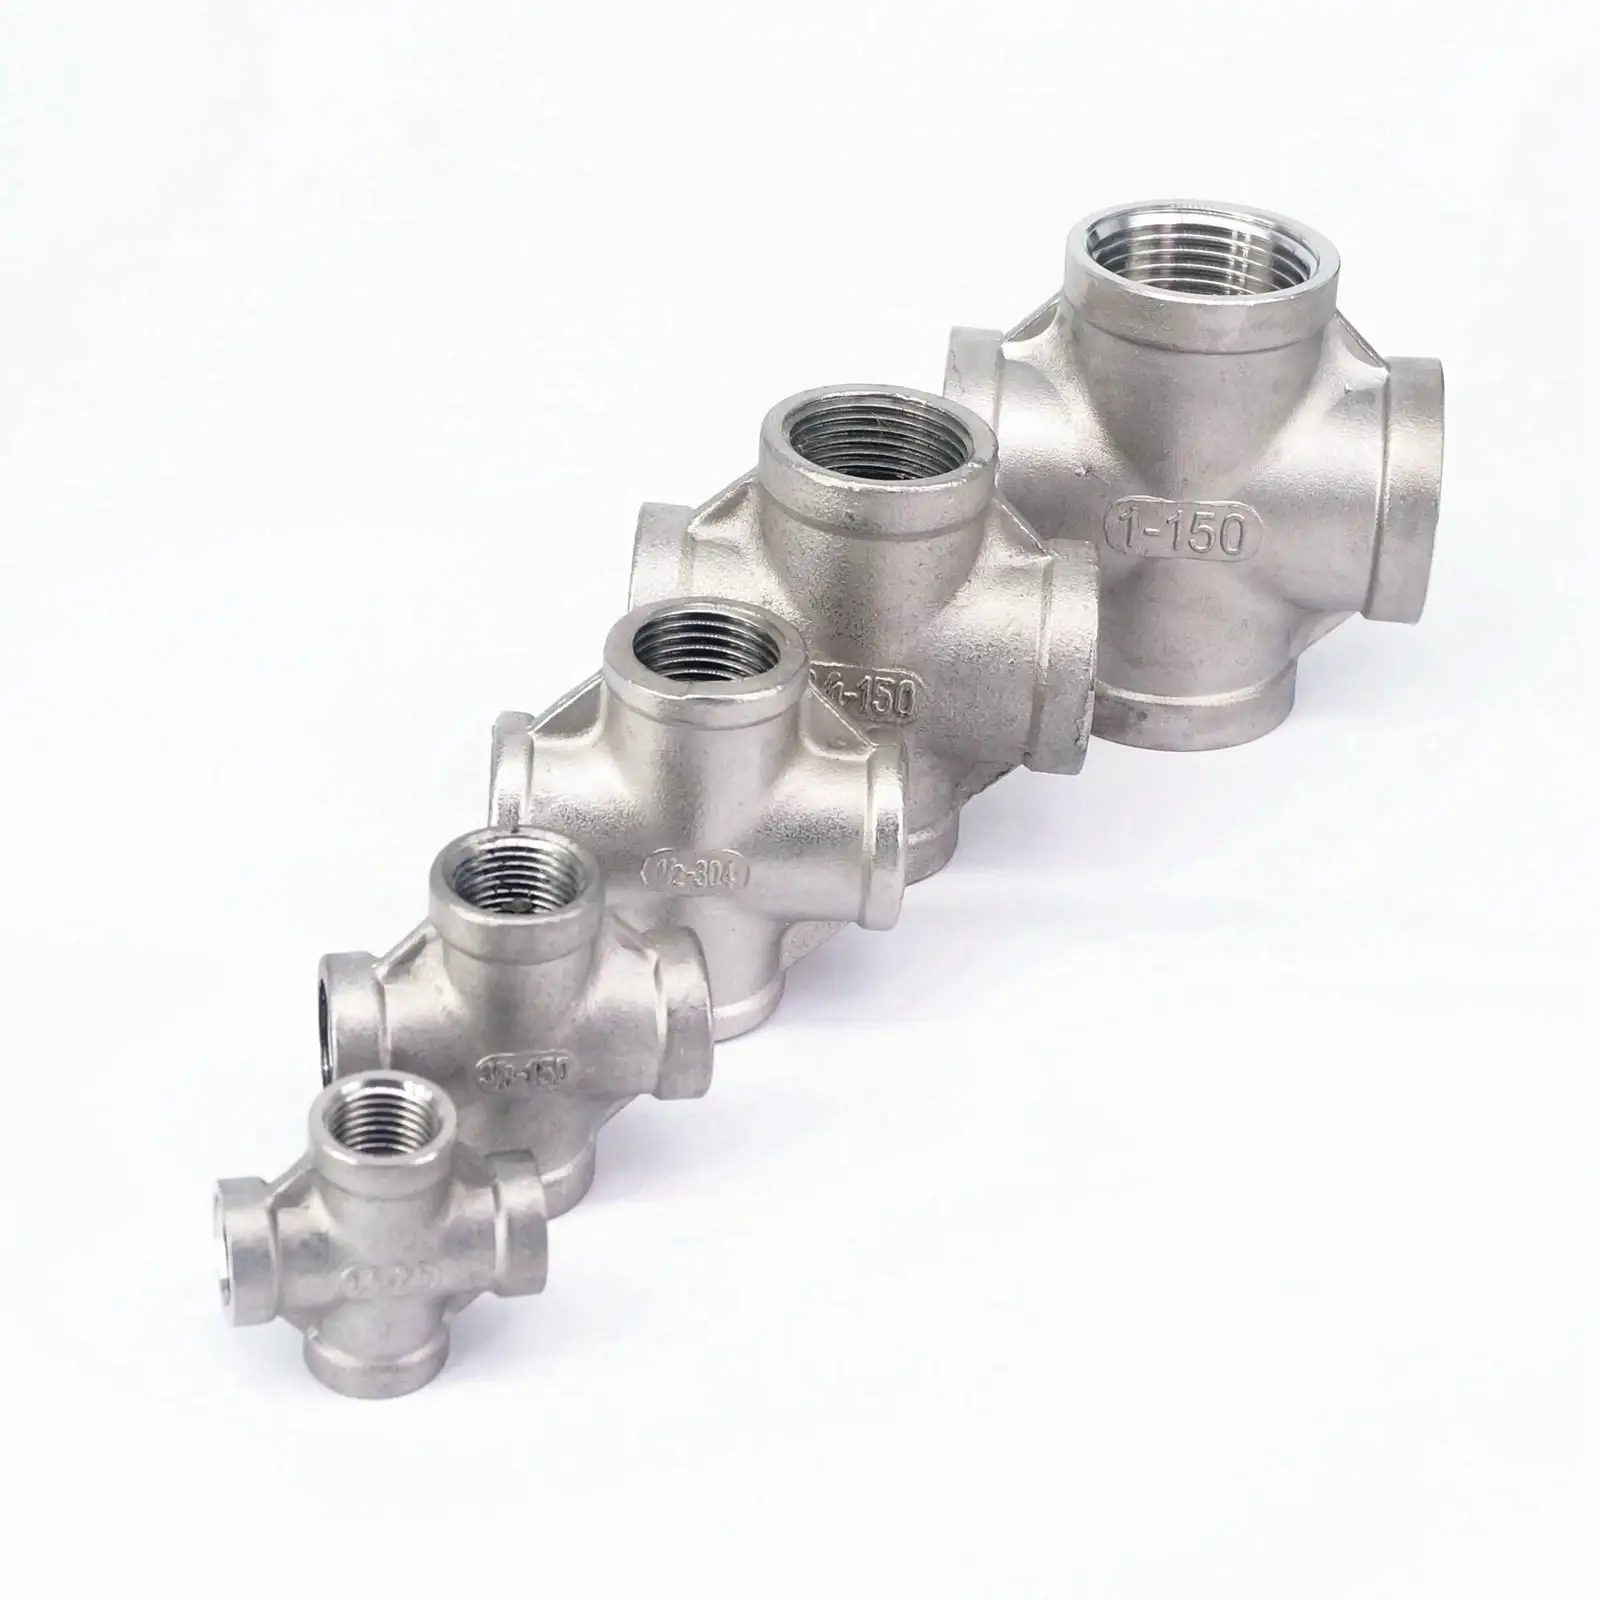 

Equal 1/8" 1/4" 3/8" 1/2" 3/4" 1" 1-1/4" 1-1/2" 2" BSP Thread Female 304 Stainless Steel Cross 4 Ways Pipe Fitting